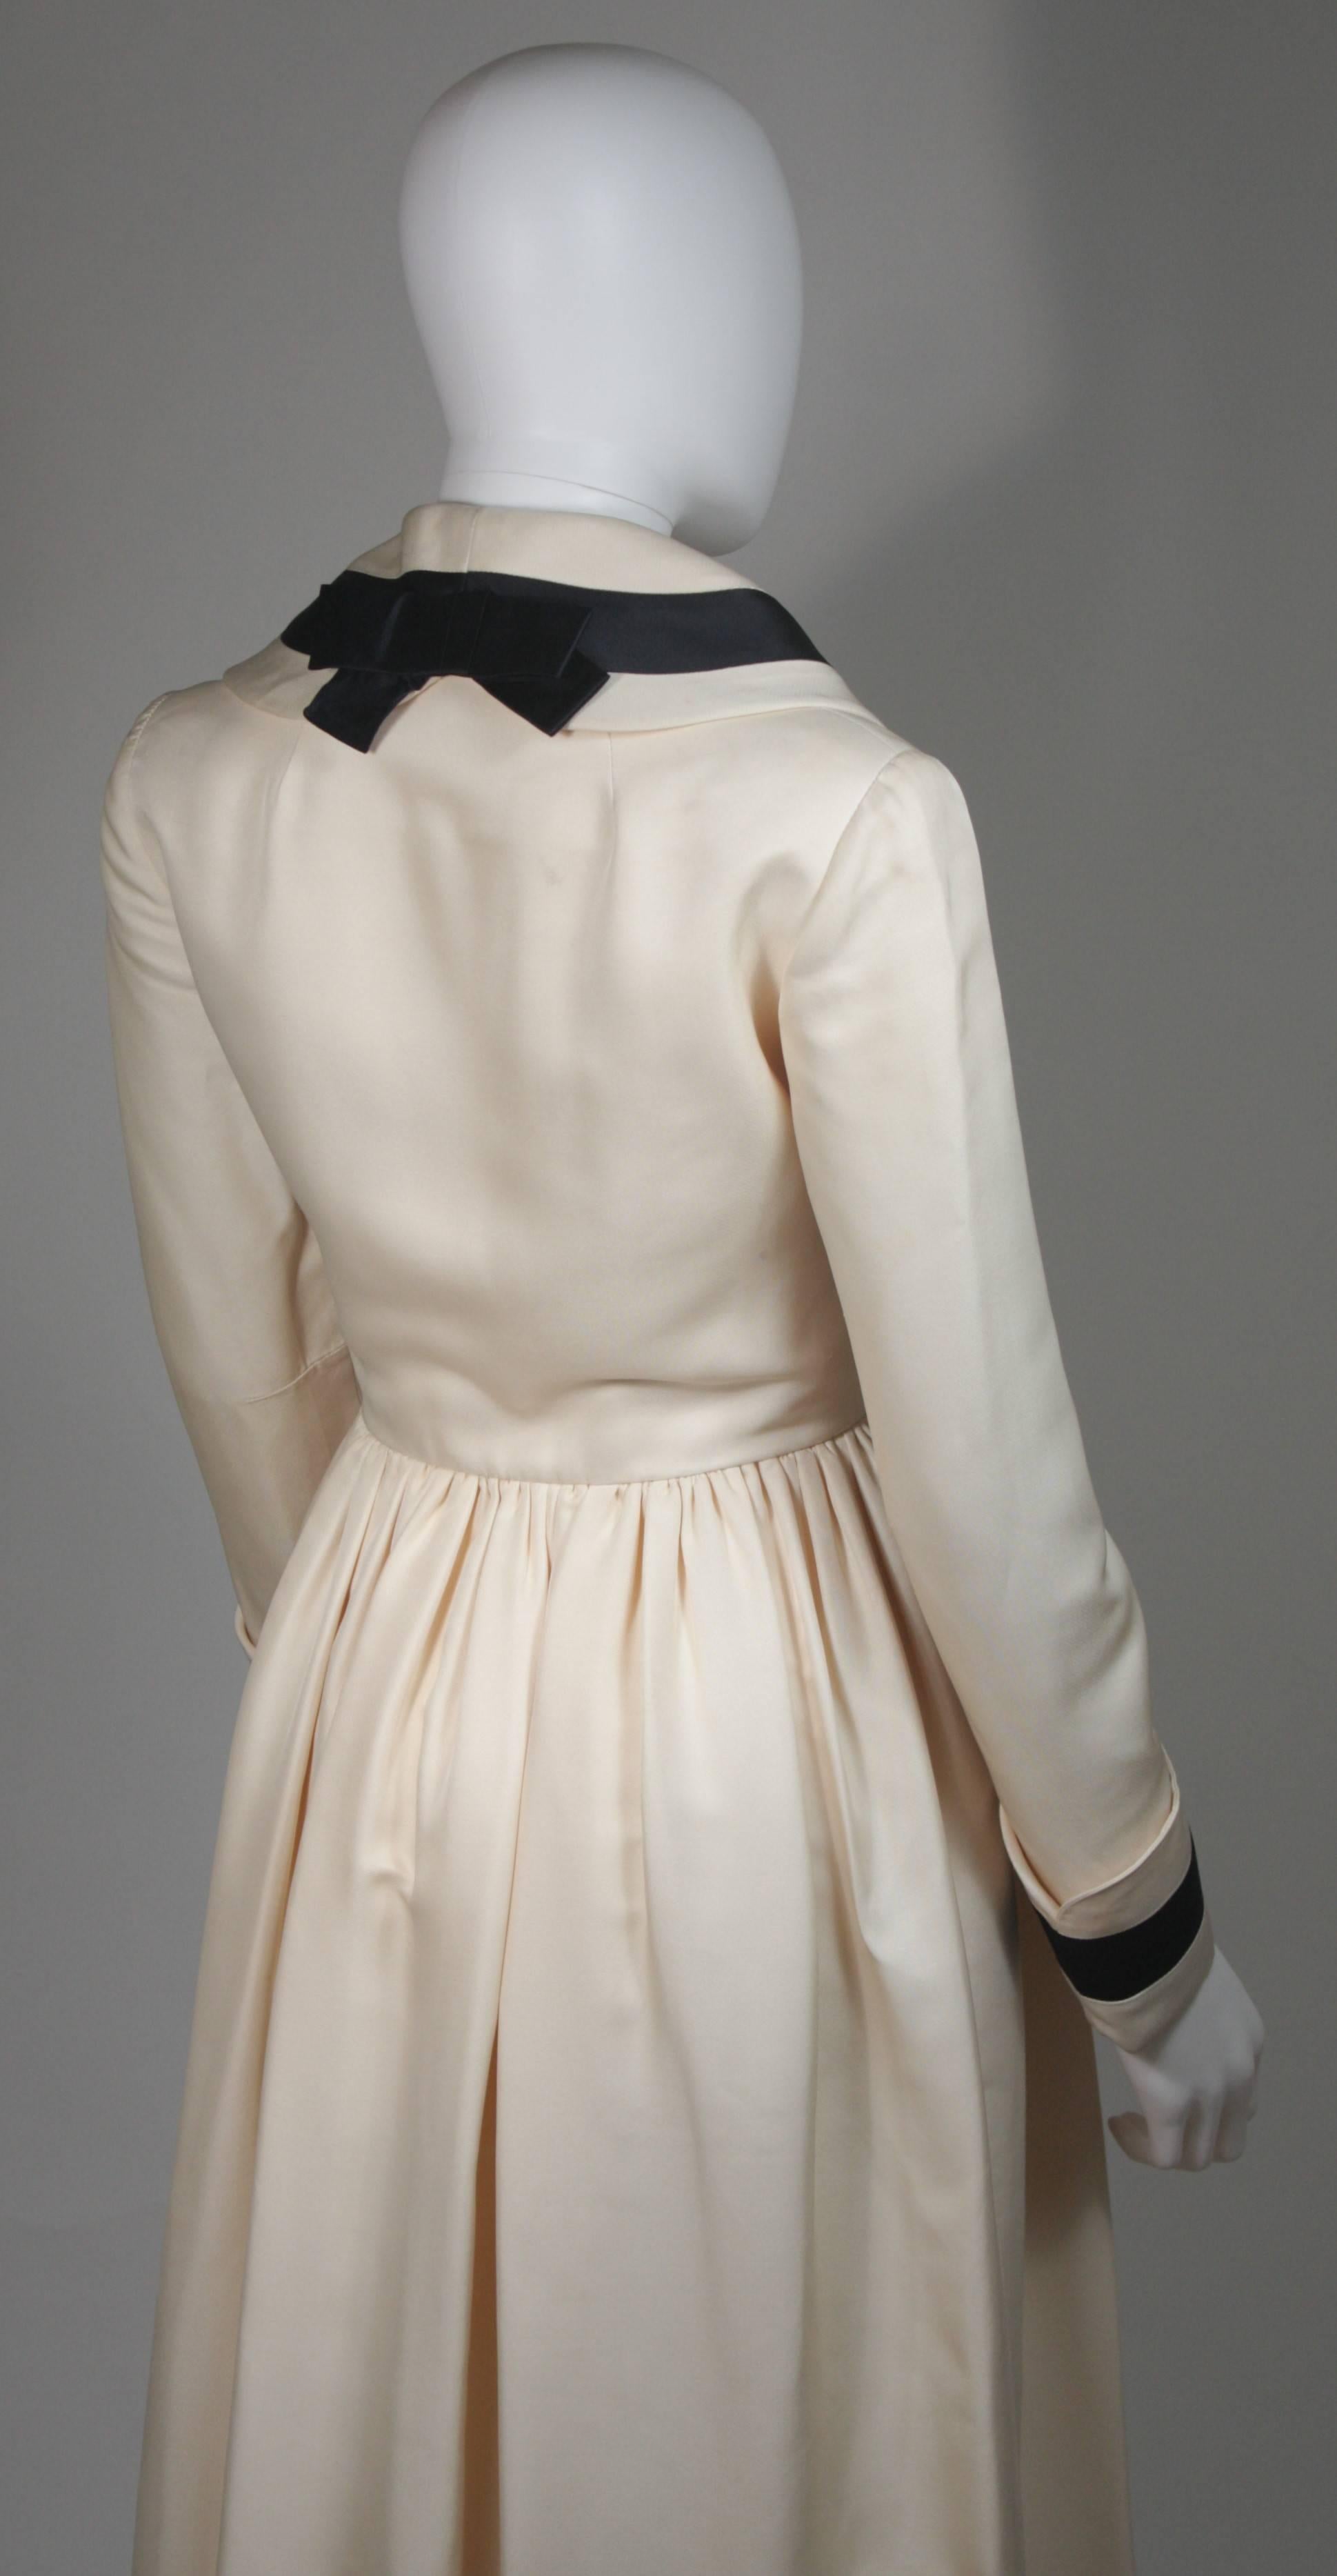 Geoffrey Beene Cream and Black Sailor Inspired Dress Size Small 2